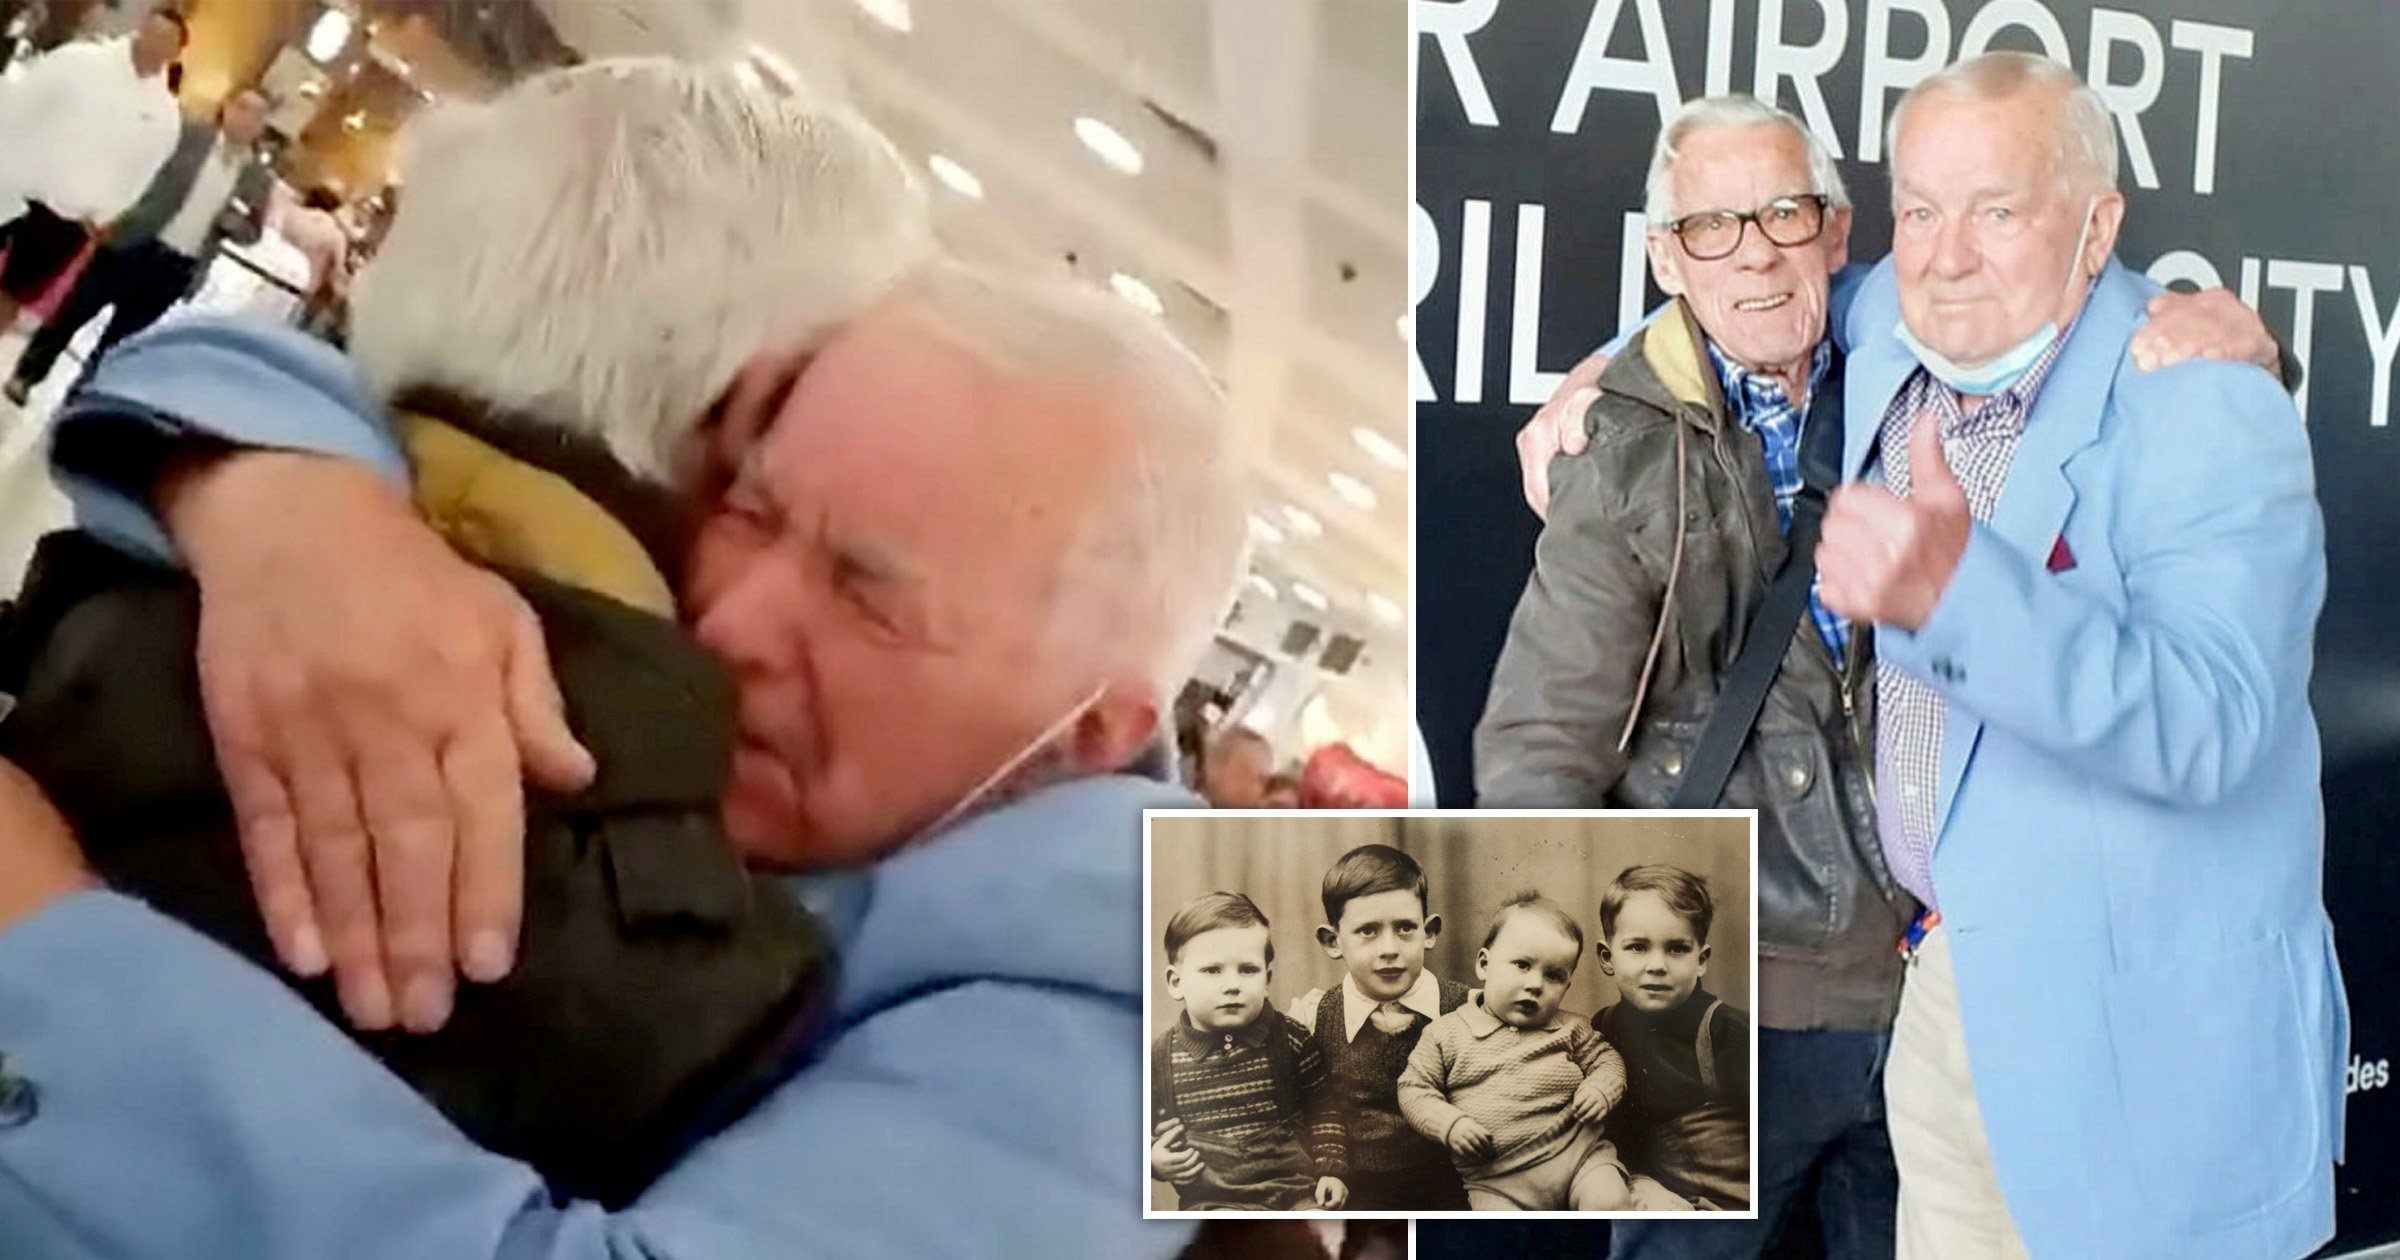 Long-lost brothers who spent 77 years apart after dad put youngest up for adoption finally reunite